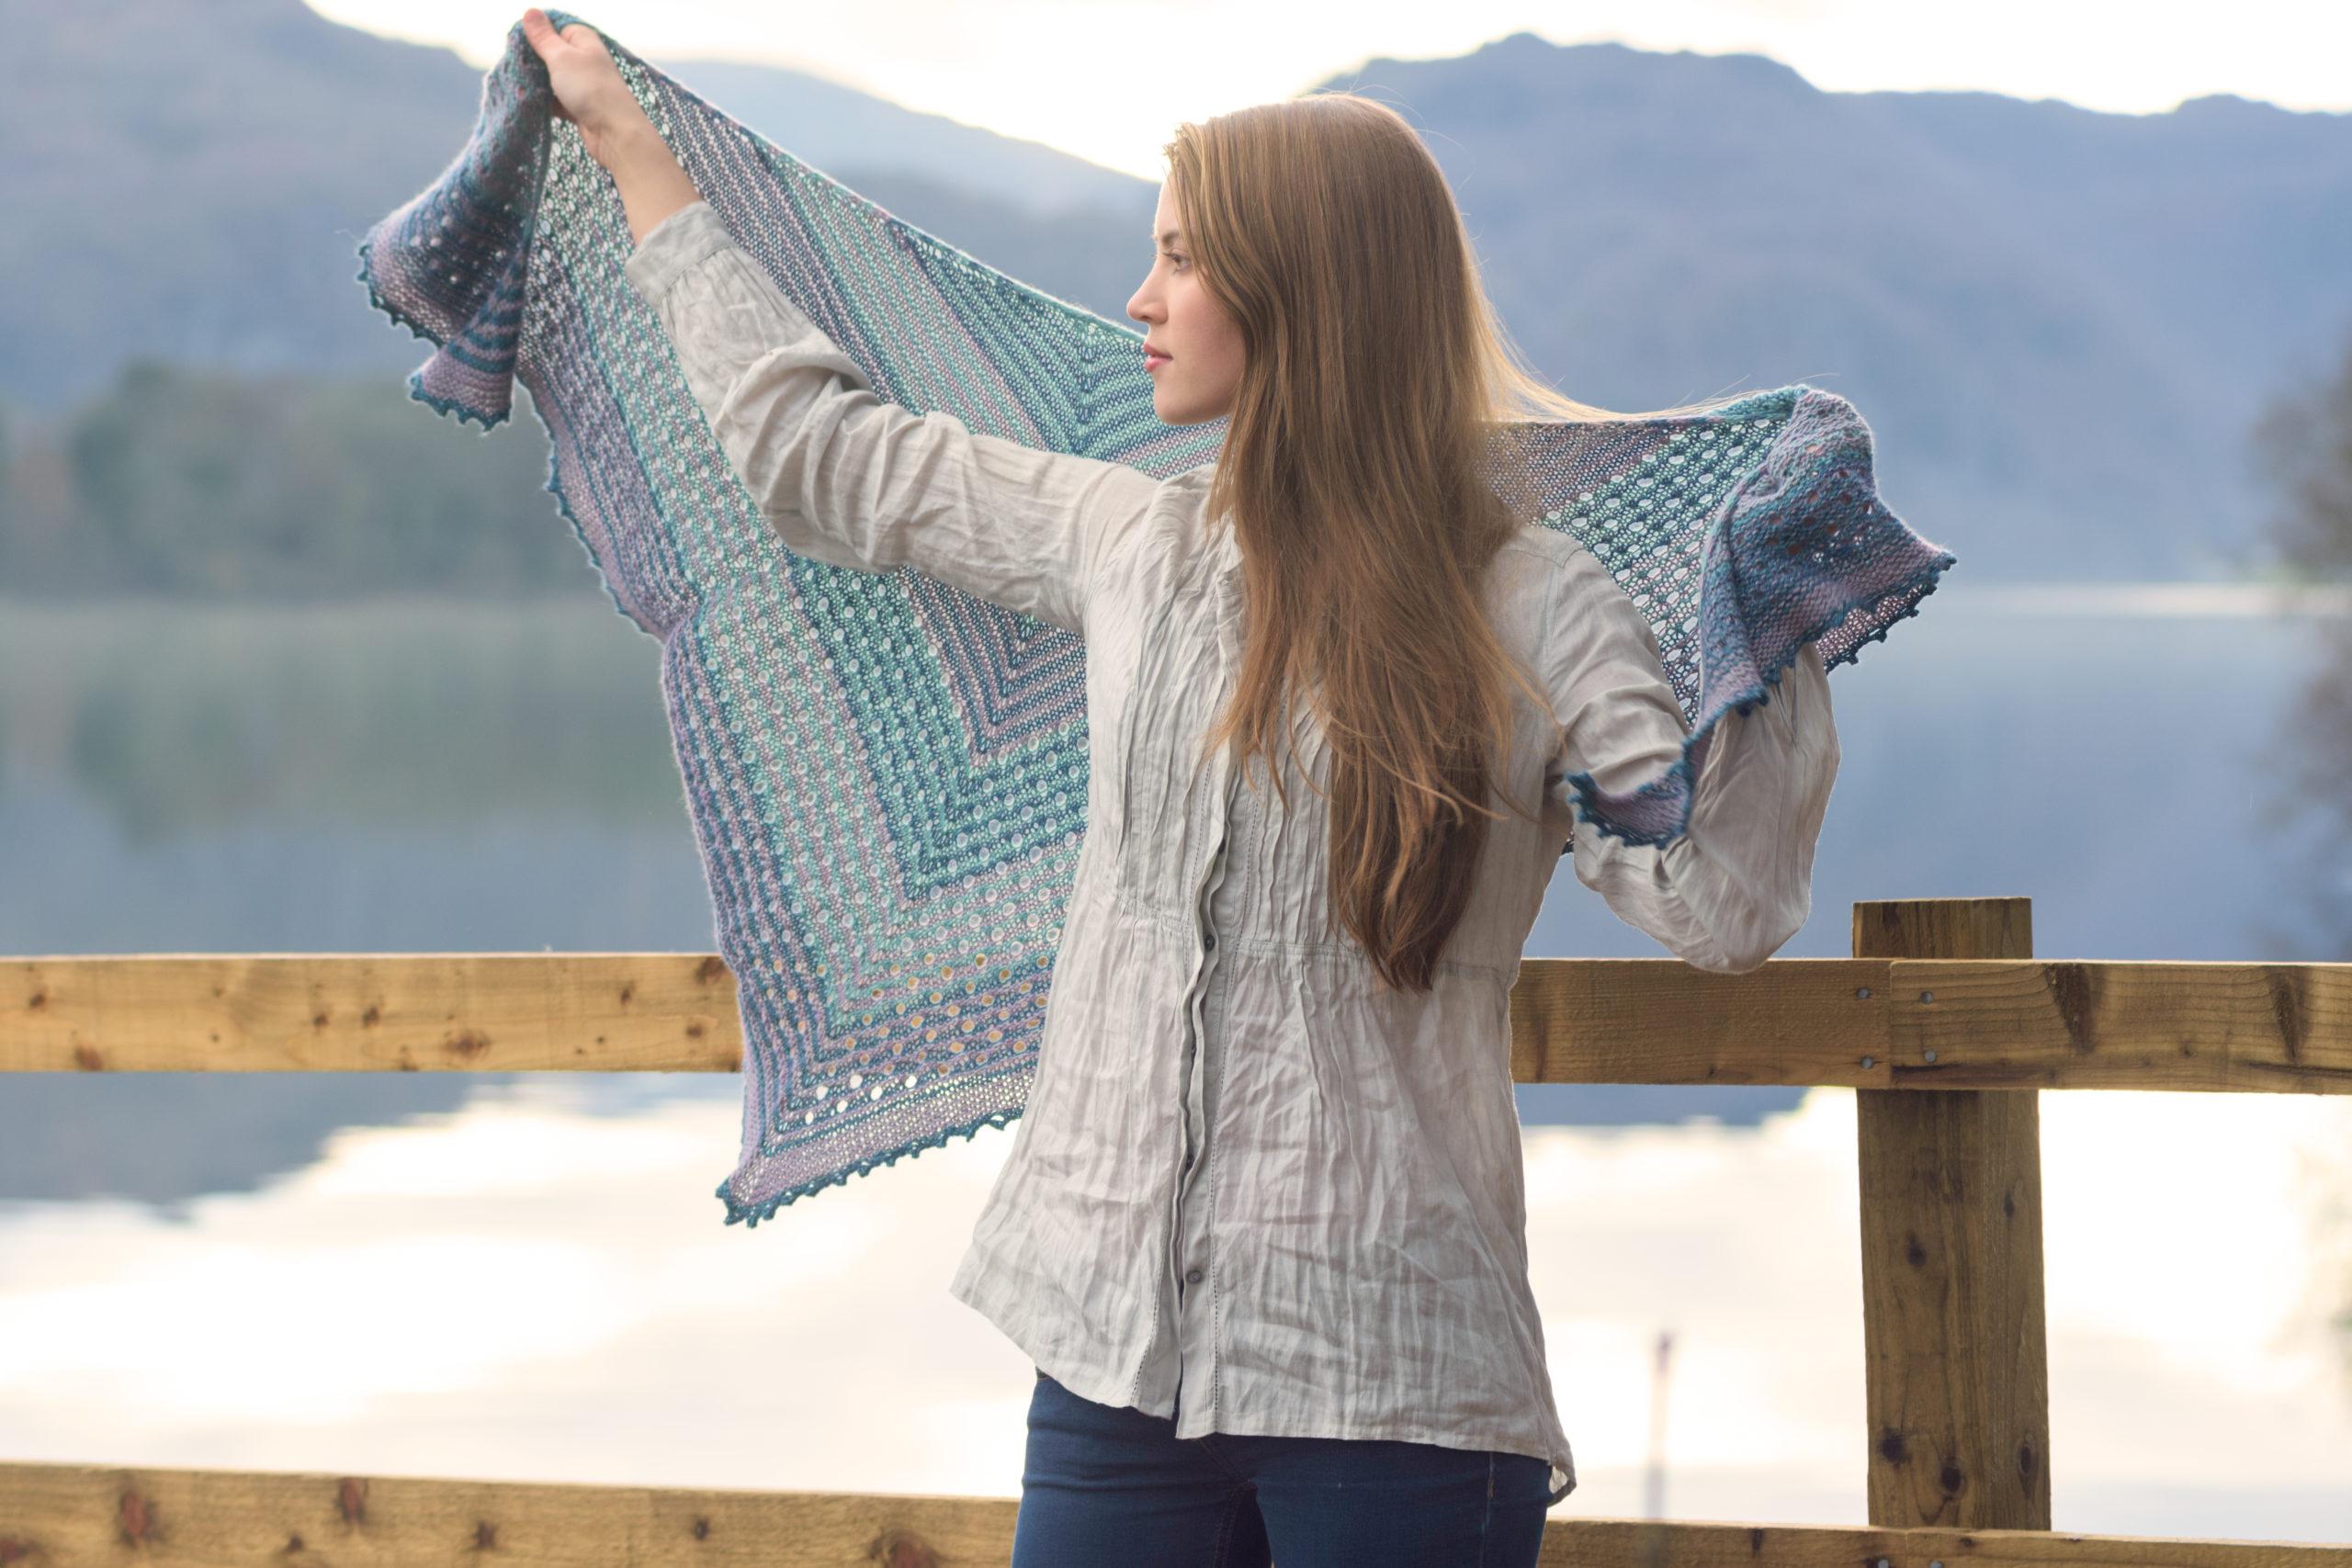 Kelso Shawl designed by Helen Stewart of Curious Handmade